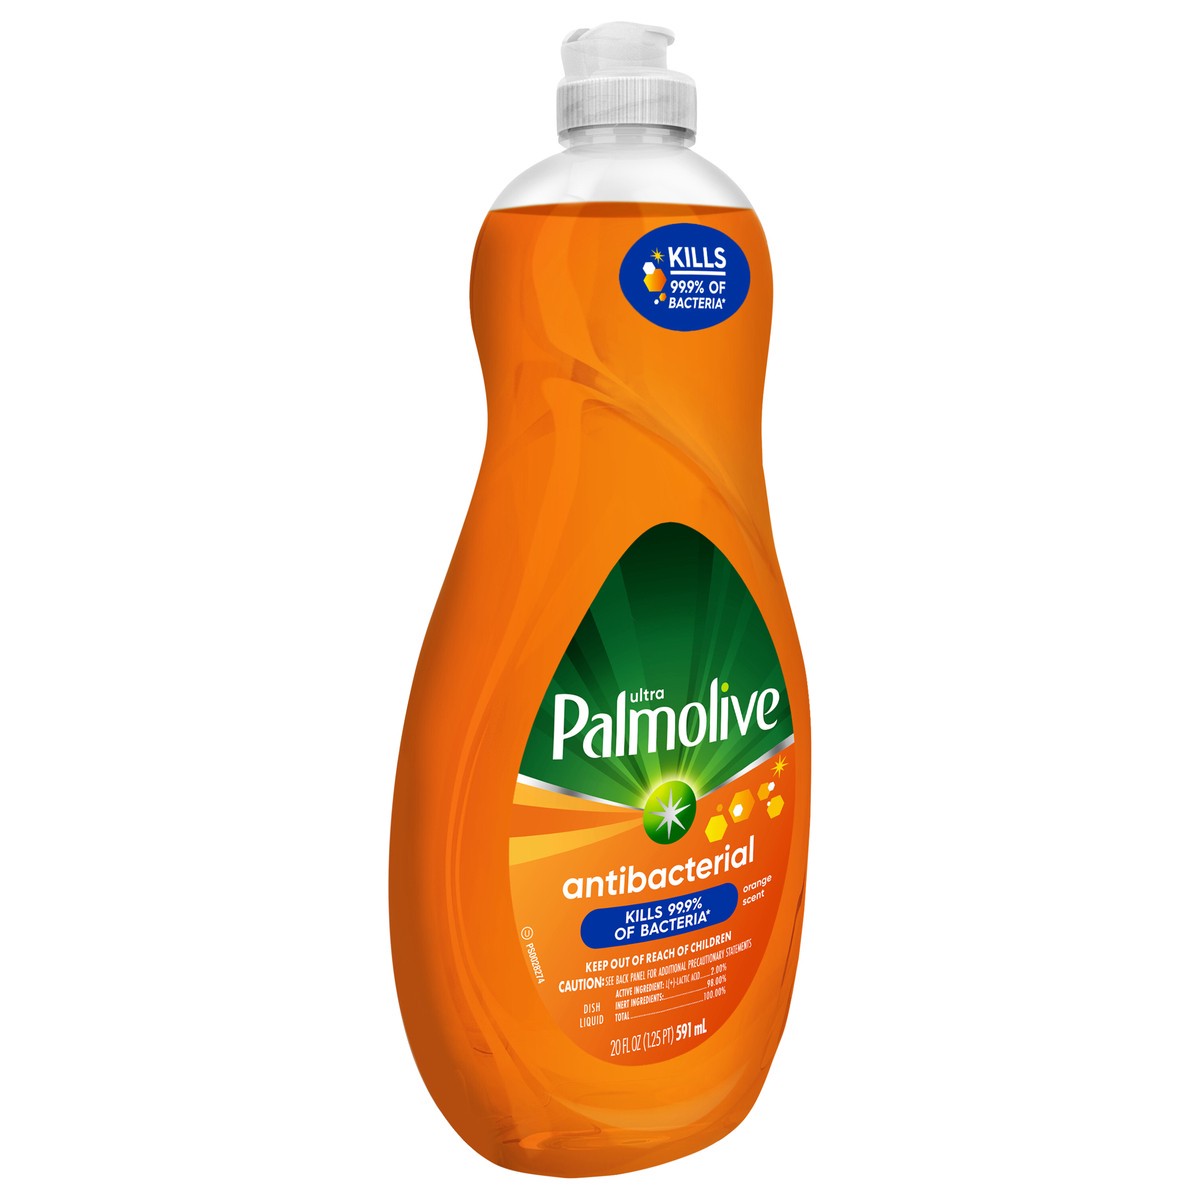 slide 2 of 8, Palmolive Ultra Palmolive Antibacterial Concentrated Dish Liquid, Orange Scent - 20 Fluid Ounce, 20 oz